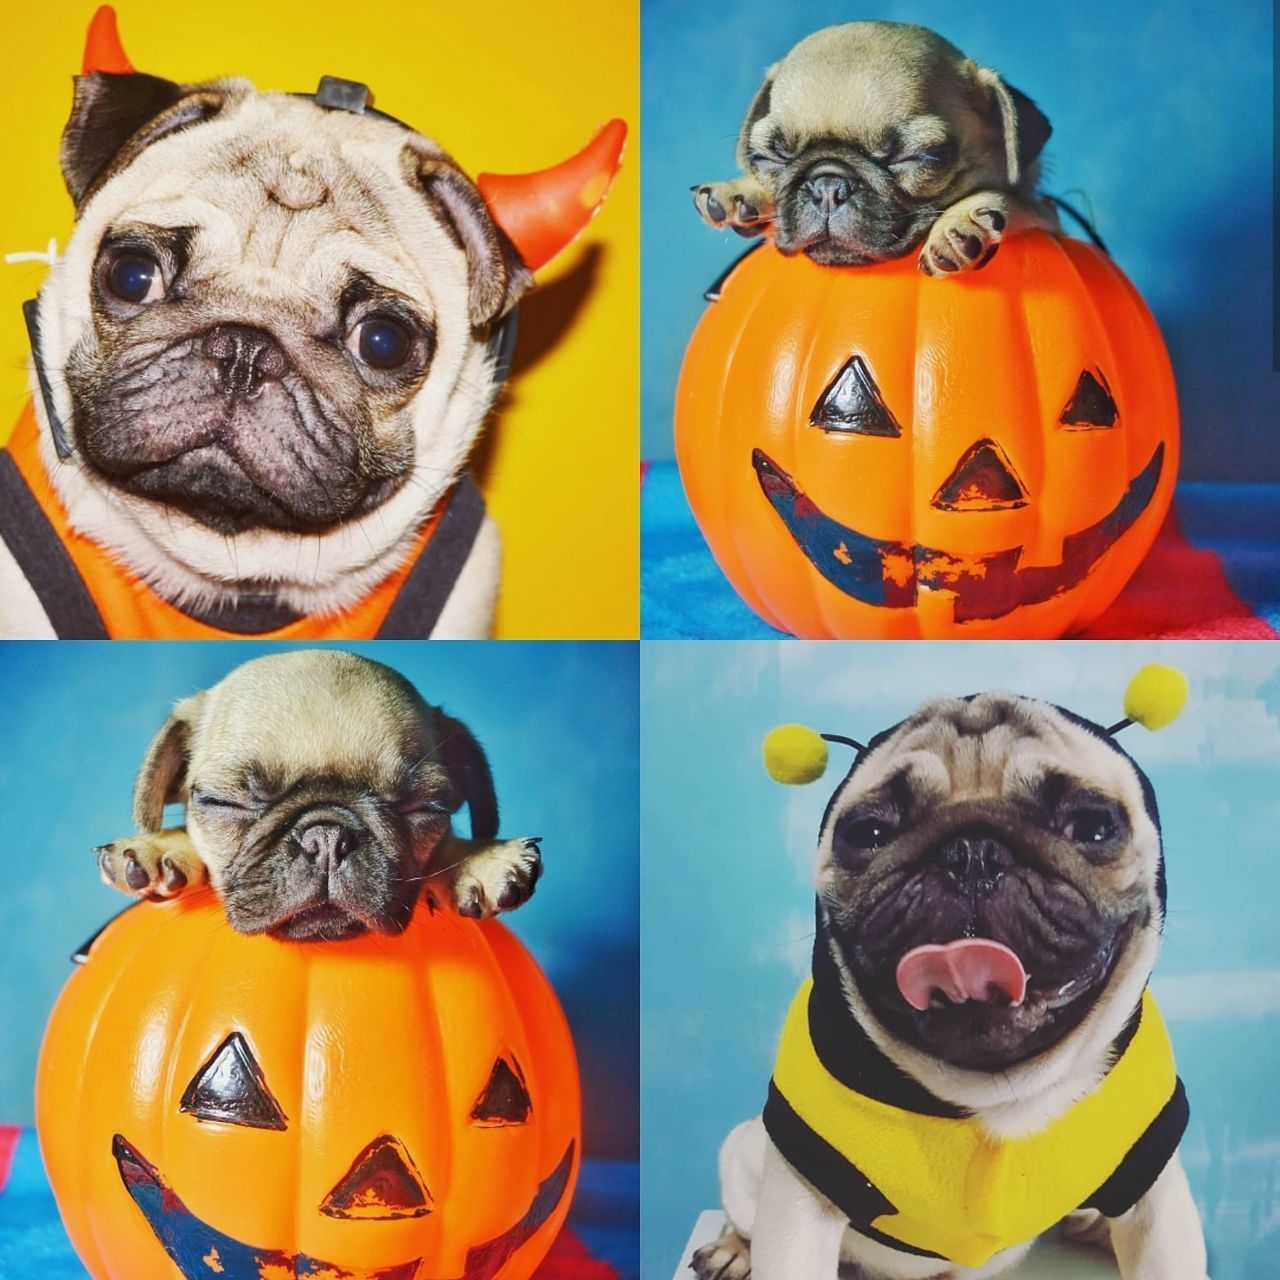 CLOSE-UP PORTRAIT OF A DOG IN A HALLOWEEN